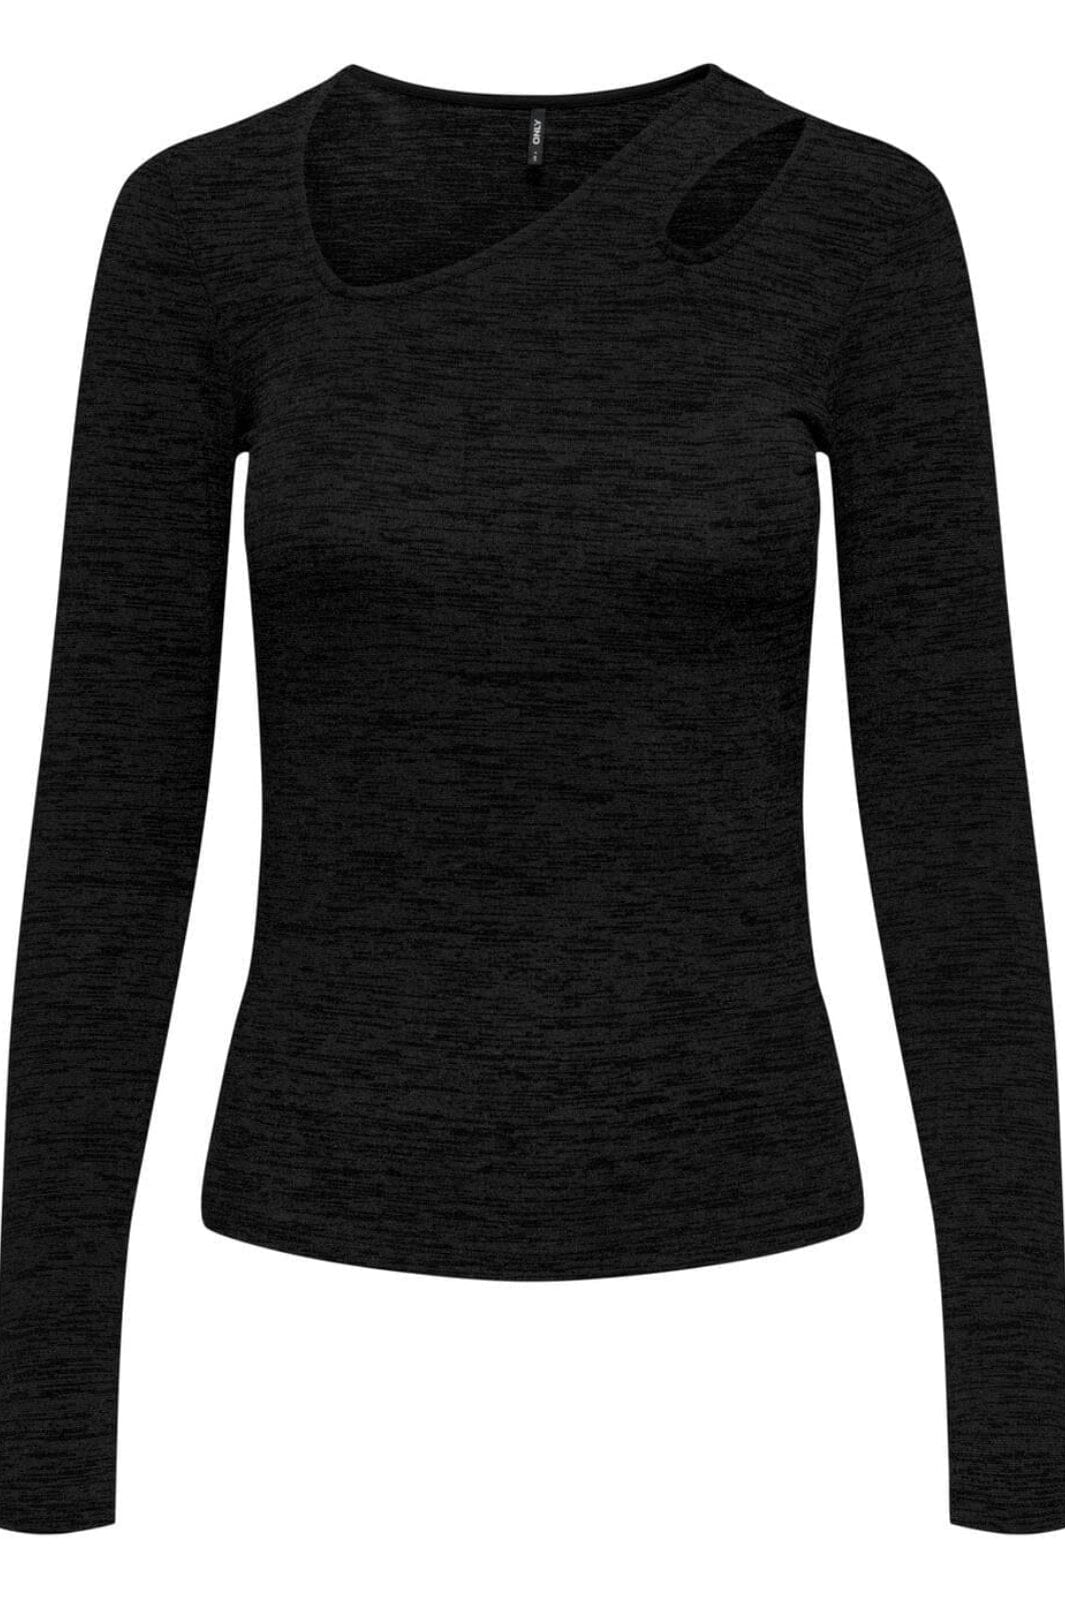 Only - Onlroma L/S Shine Cut-Out Top - 4433983 Black Black Glitter Bluser 